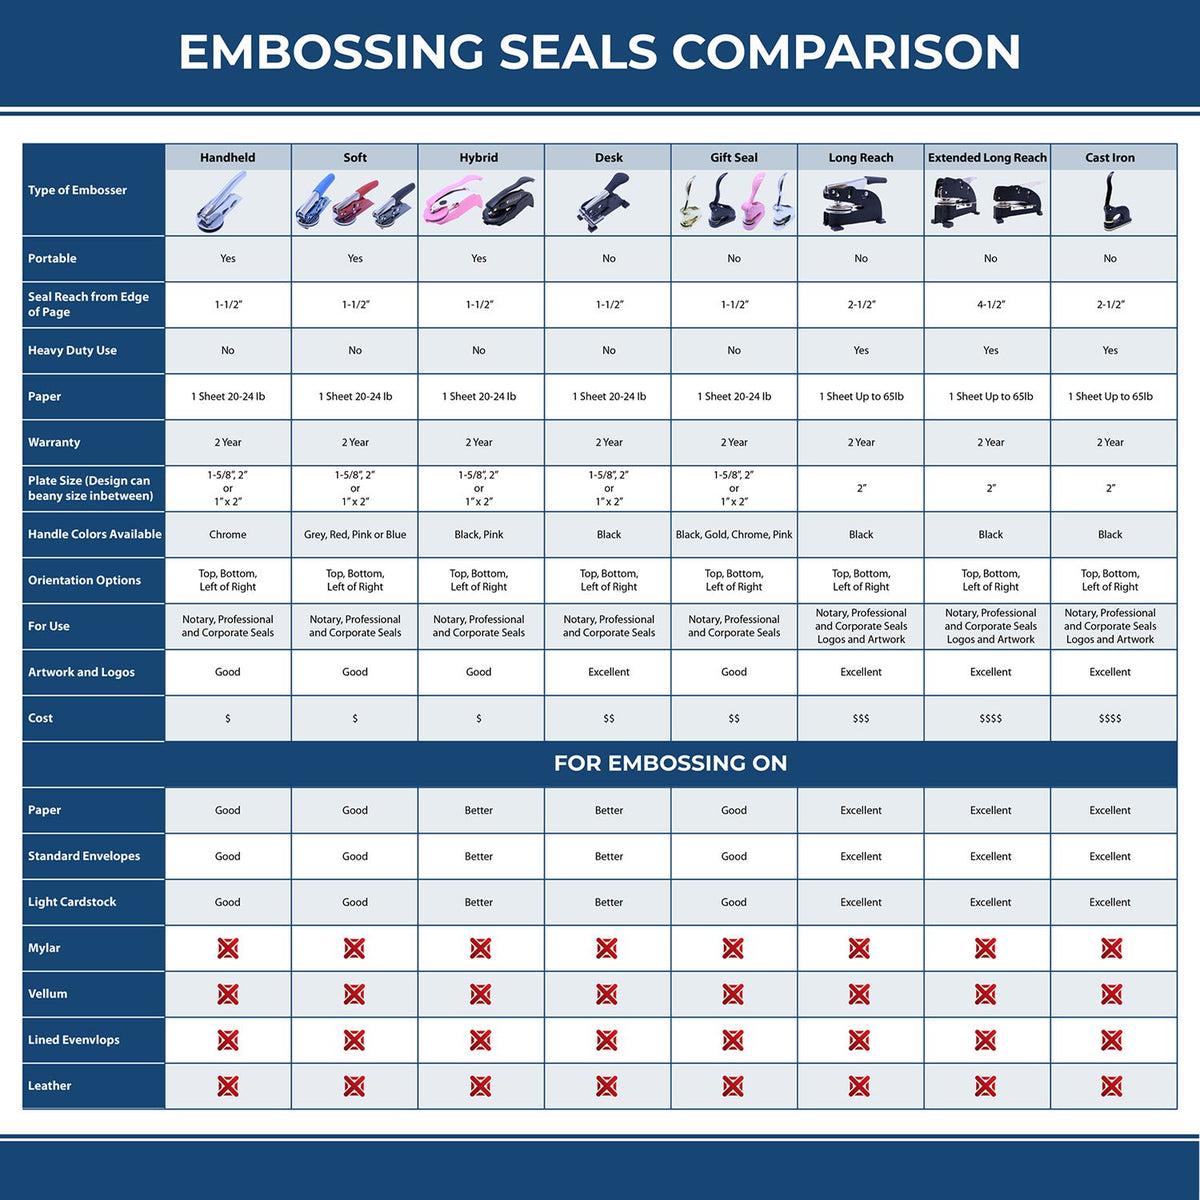 A comparison chart for the different types of mount models available for the Hybrid Montana Land Surveyor Seal